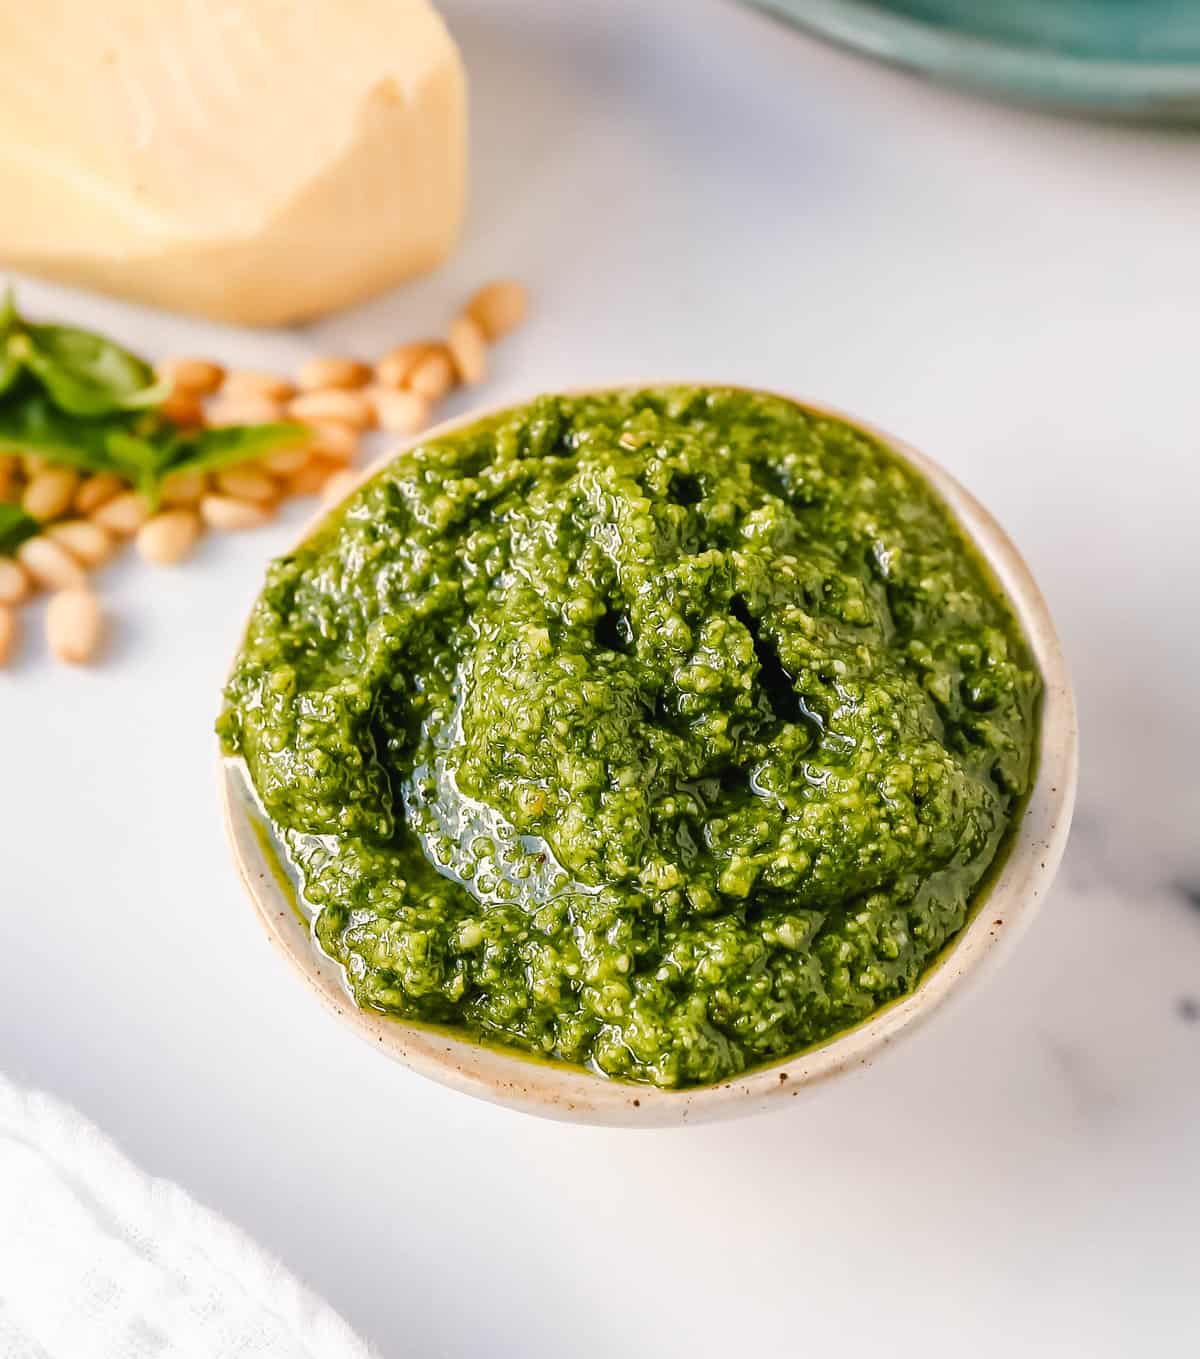 Homemade Basil Pesto Sauce made with fresh basil, extra-virgin olive oil, pine nuts, garlic, parmesan cheese, and salt and pepper. This pesto sauce is the best recipe and can be used on pasta, pizza, sandwiches, or to be used as a dip with rustic French bread.